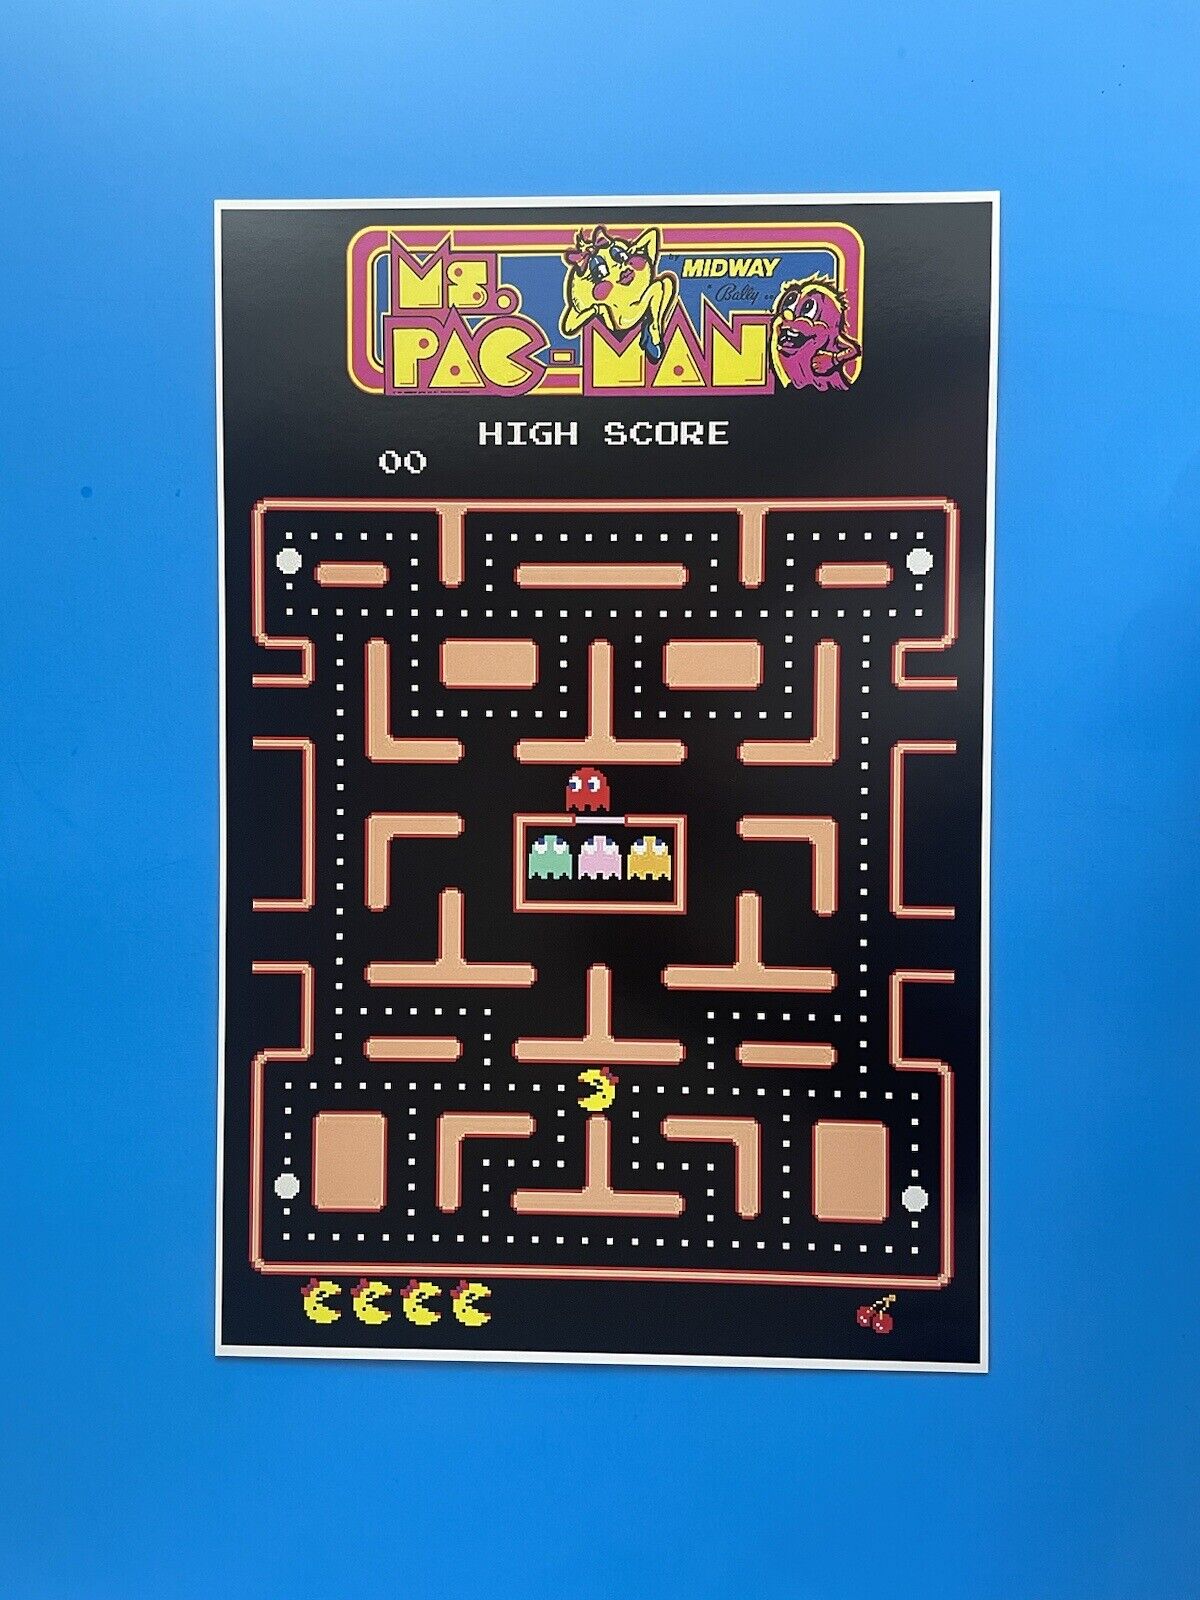 MIDWAY BALLY RETRO MS.PAC-MAN VIDEO GAME POSTER PIN UP NEW.